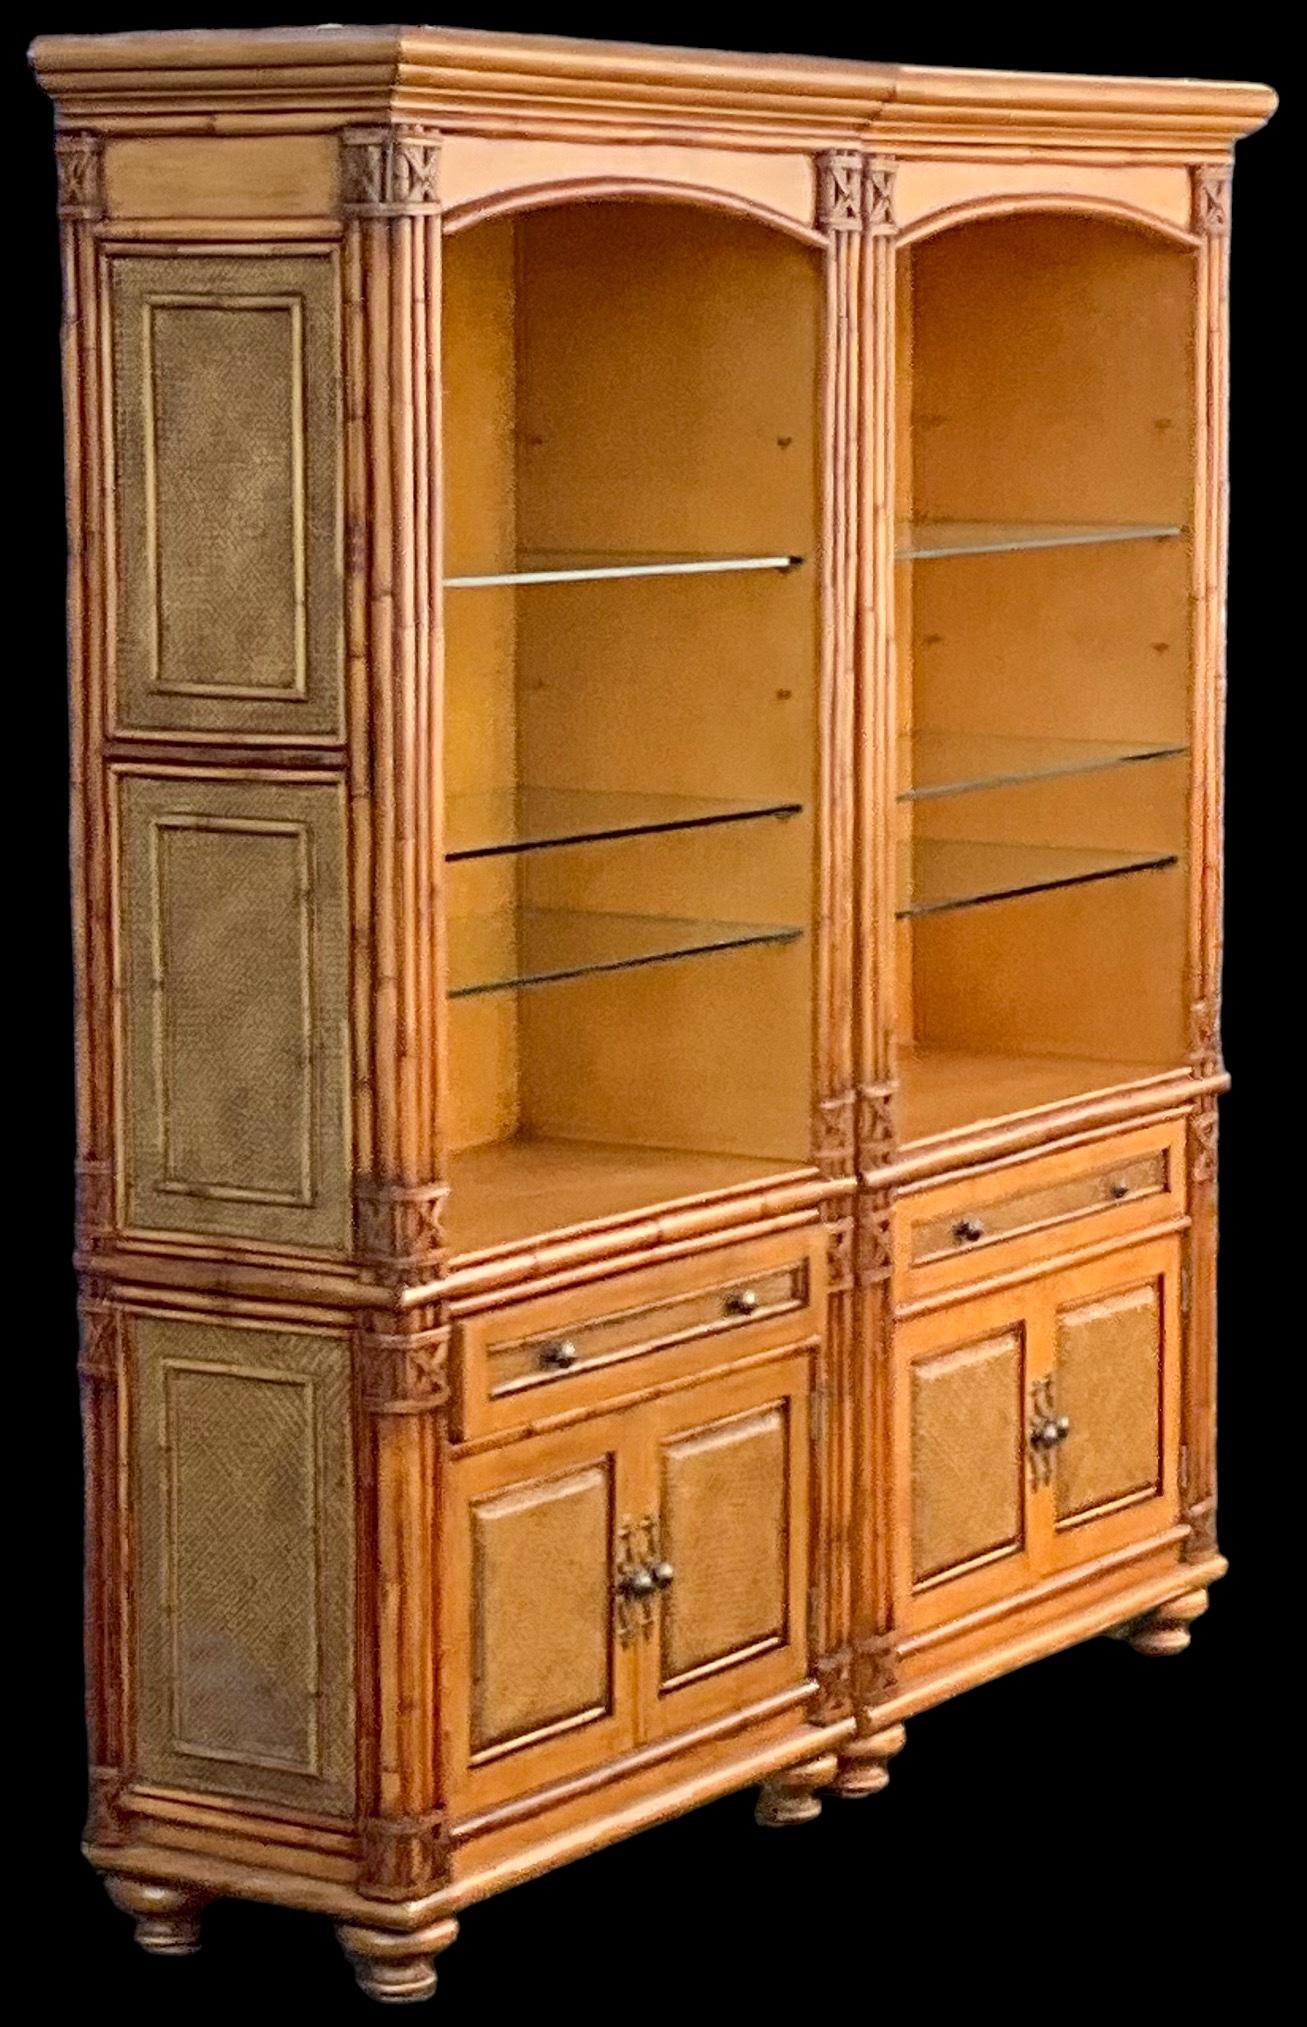 Regency Coastal Style Faux Bamboo Fruitwood Bookcases / Display Cabinets - S/2 For Sale 4